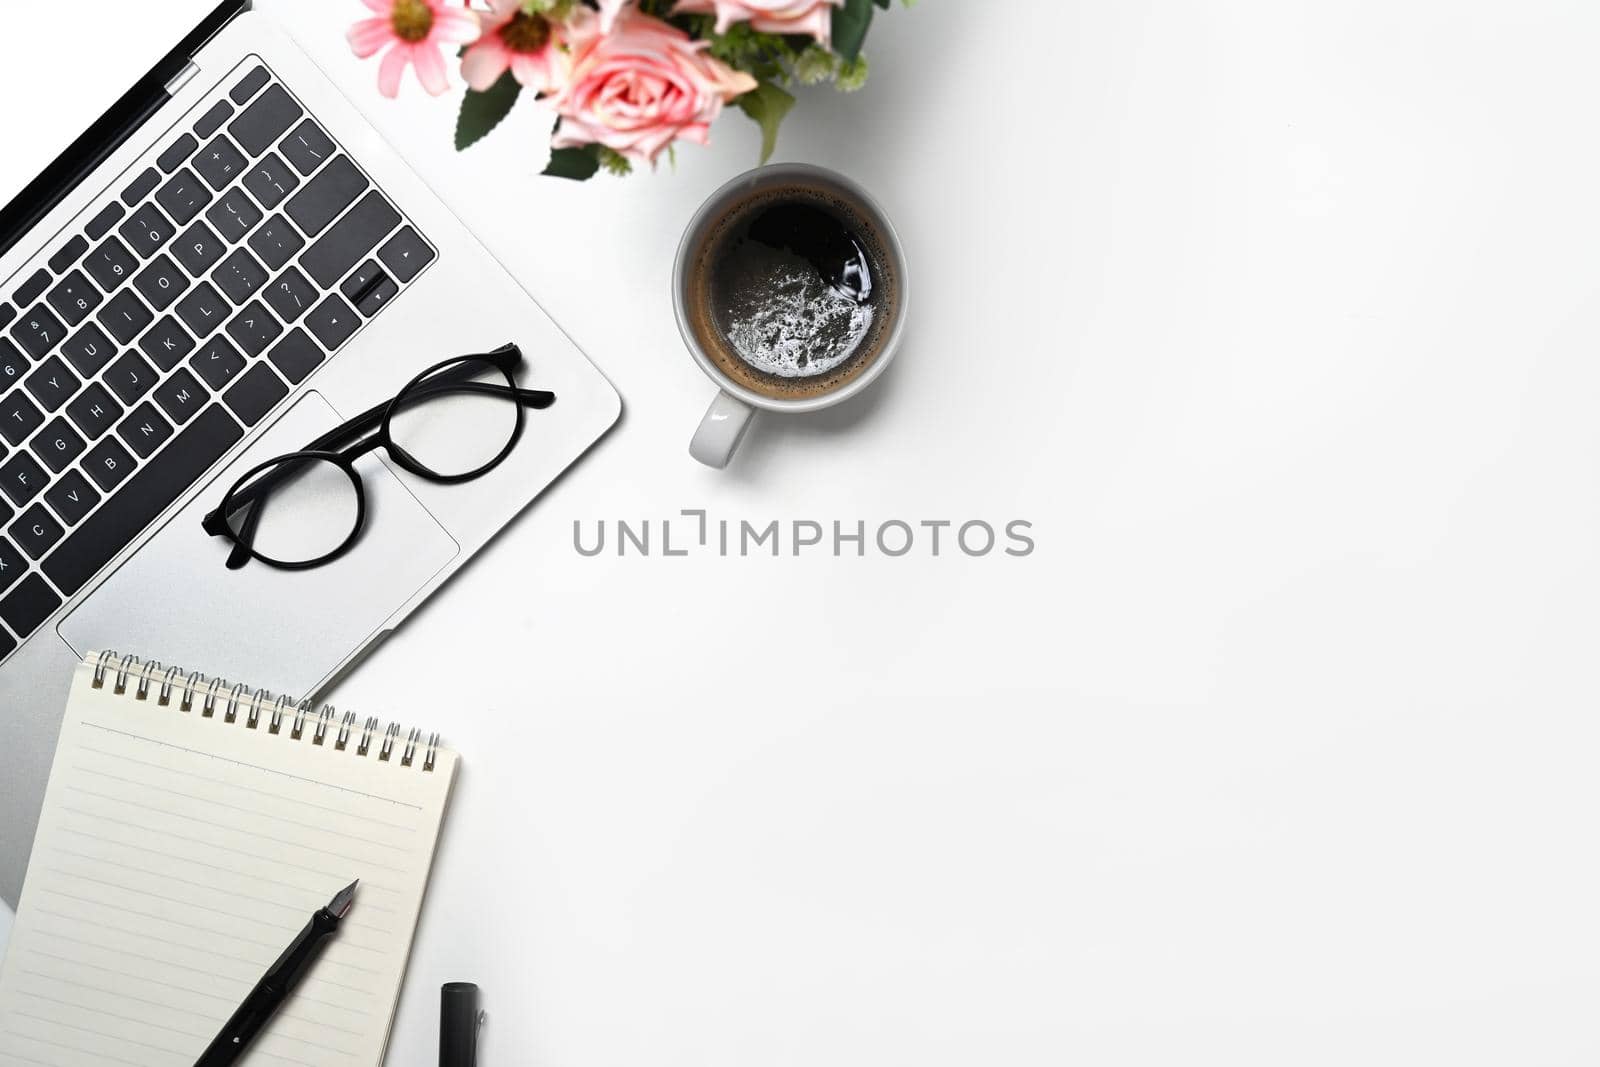 Laptop computer, eyeglasses, notebook and coffee cup on white background.